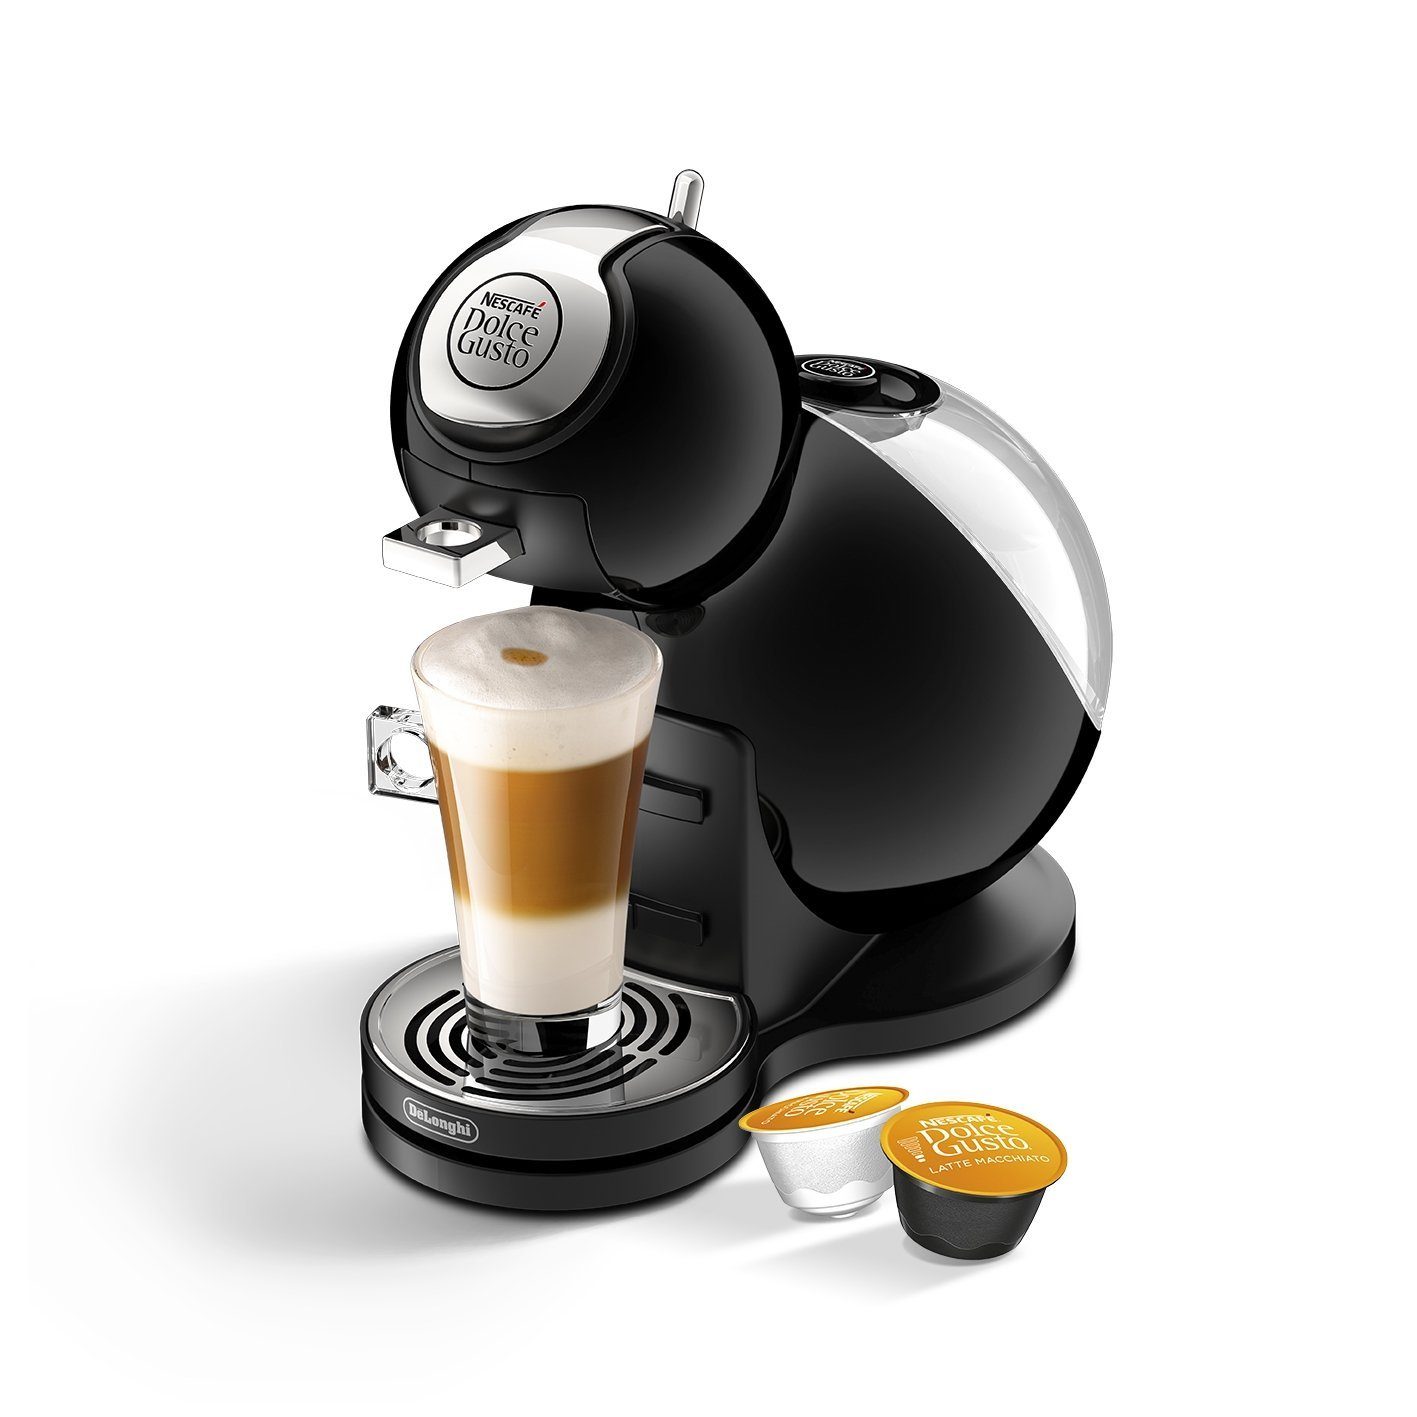 NESCAFÉ Dolce Gusto Melody 3 Coffee Machine Reviewed